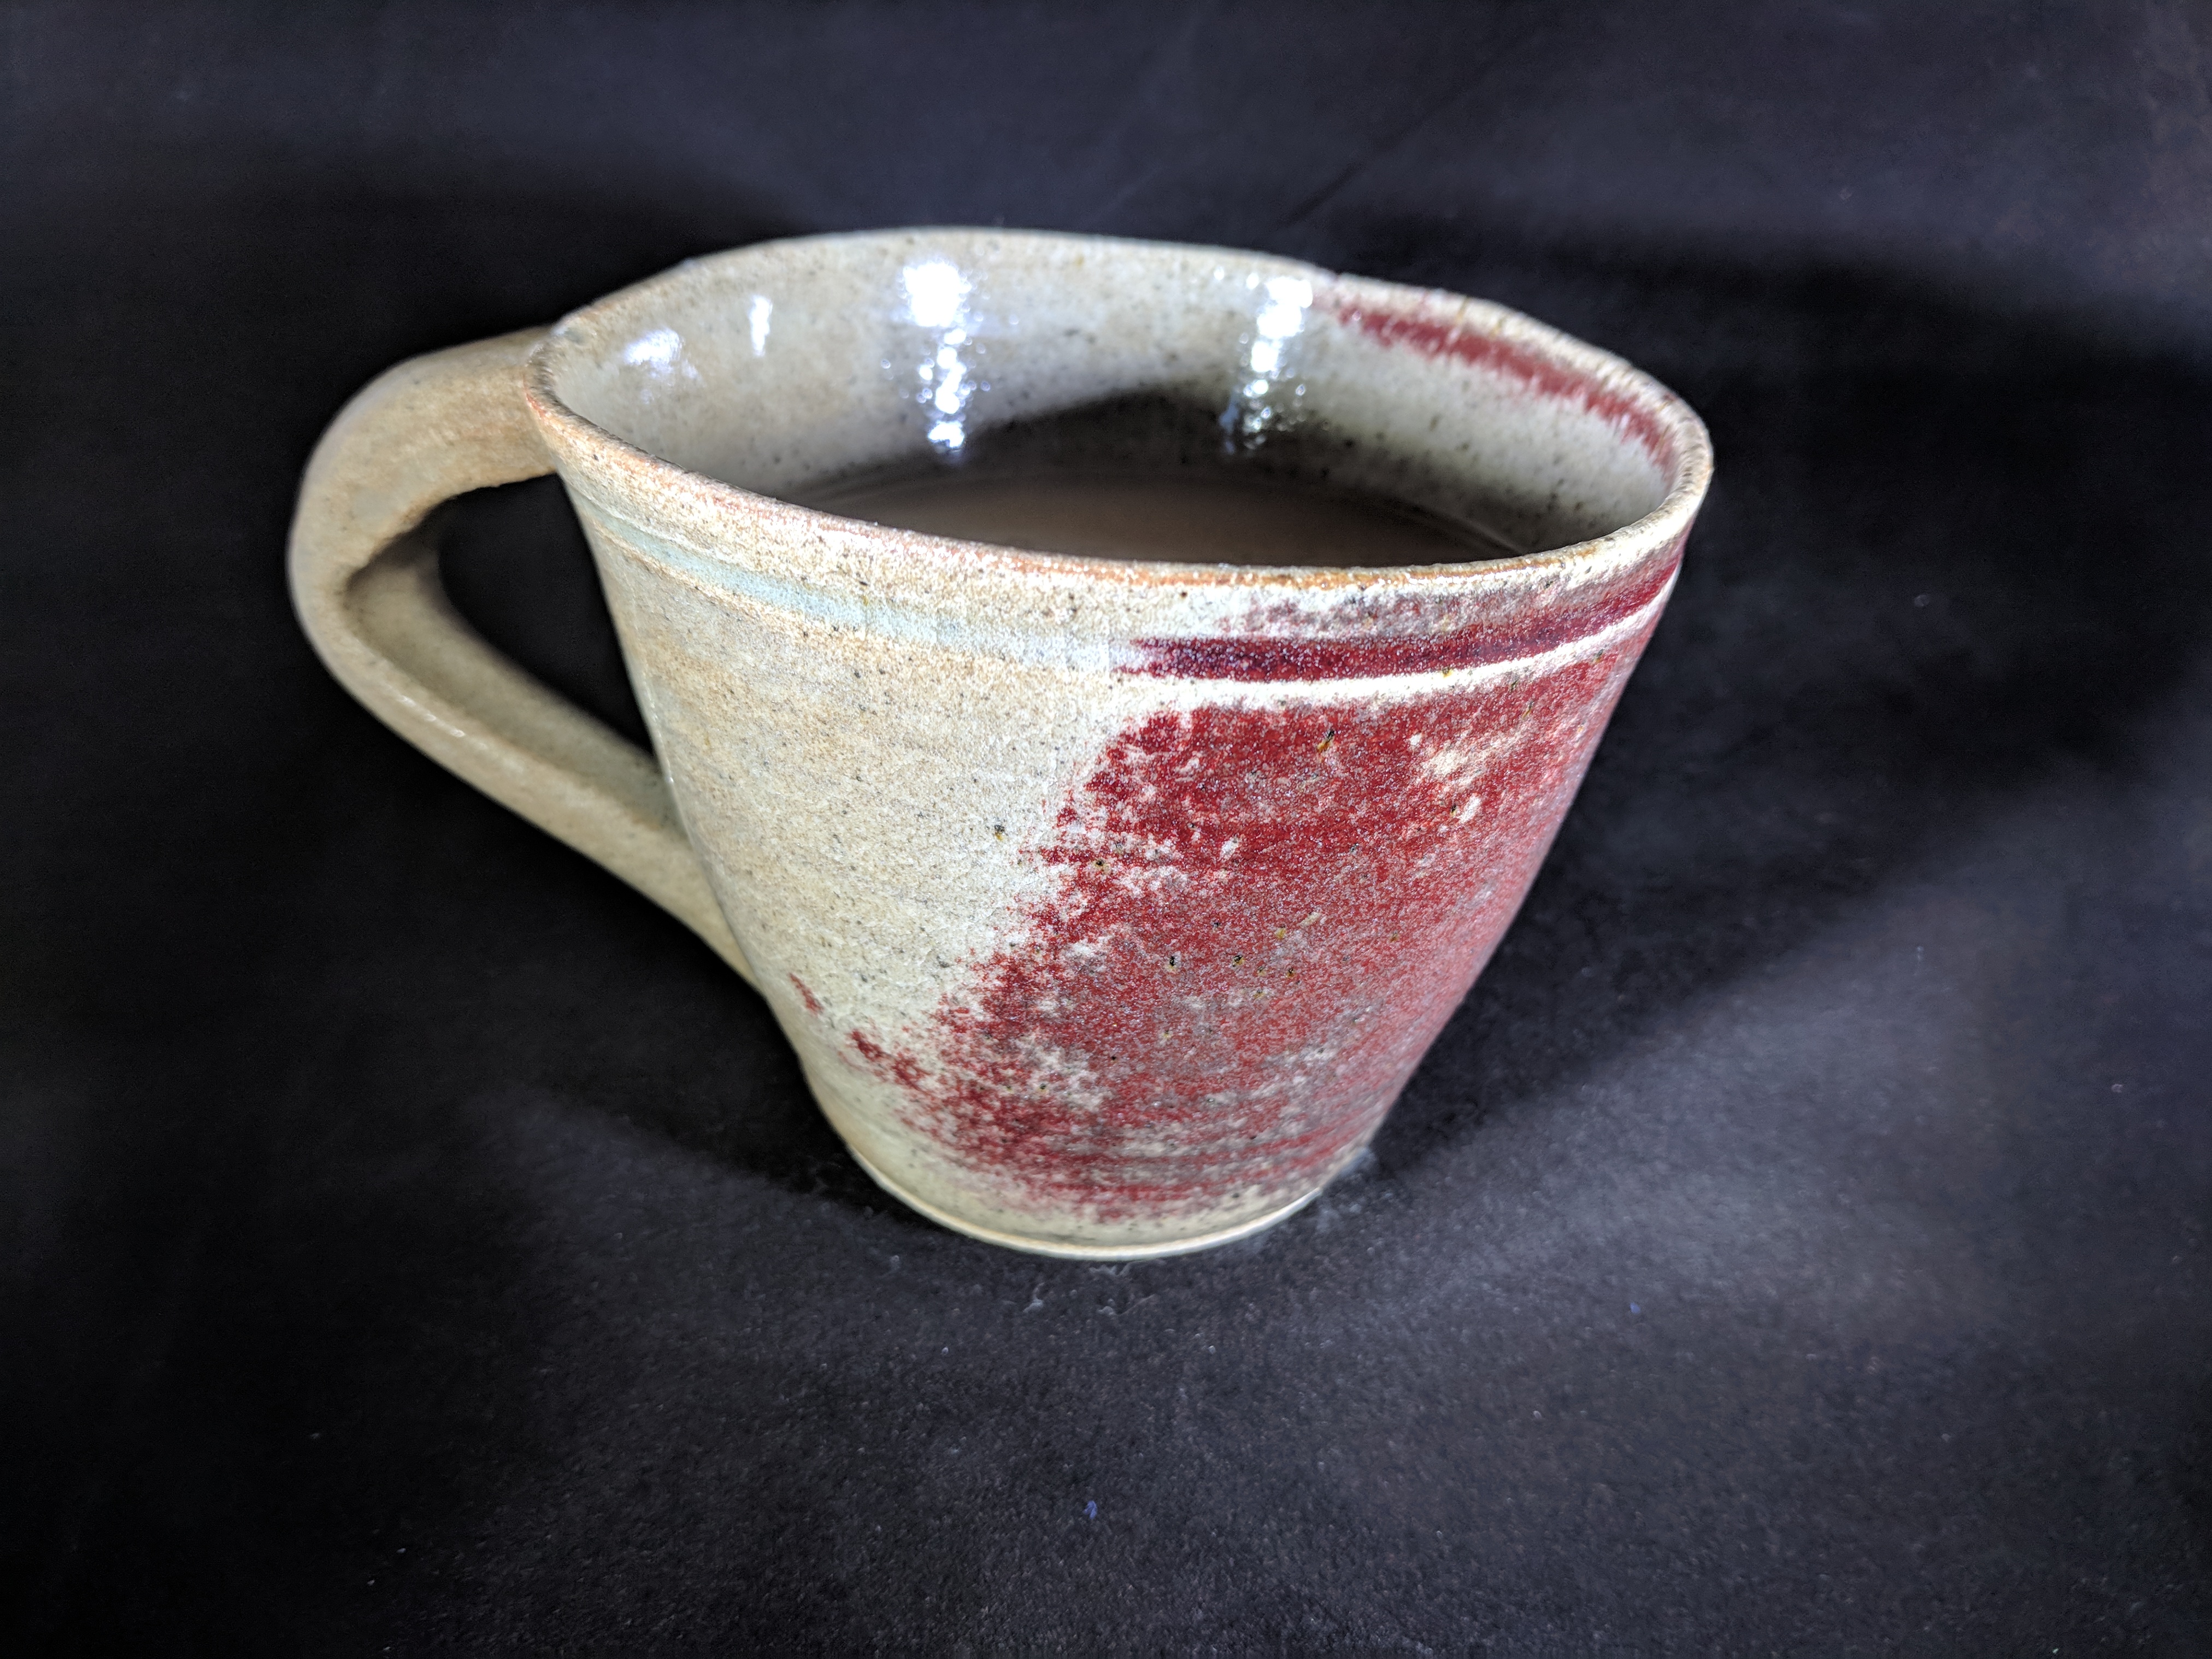 Brown and red mottled coffee cup